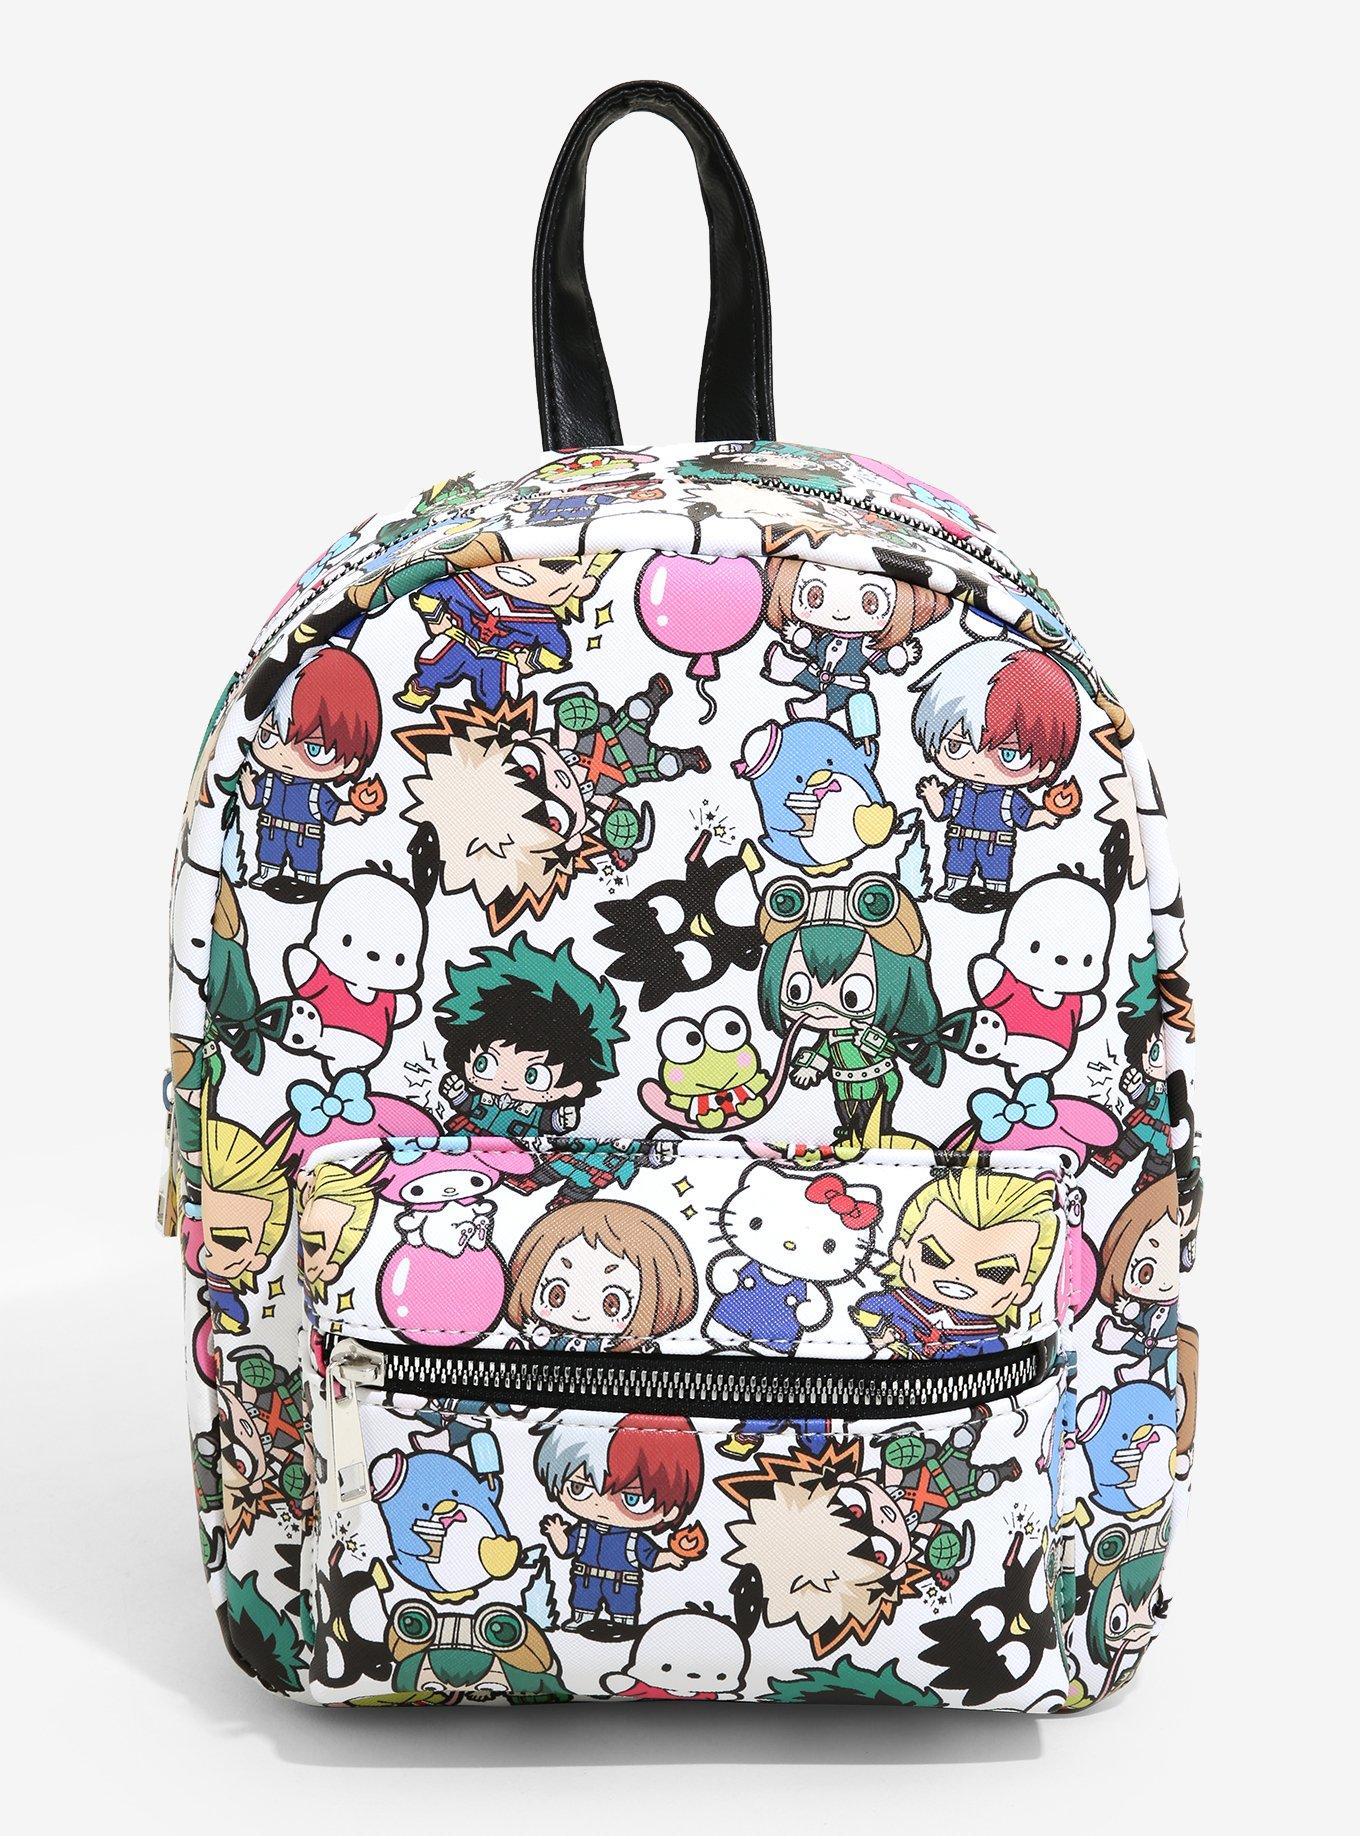 Attack on Titan x Hello Kitty and Friends Mini Backpack